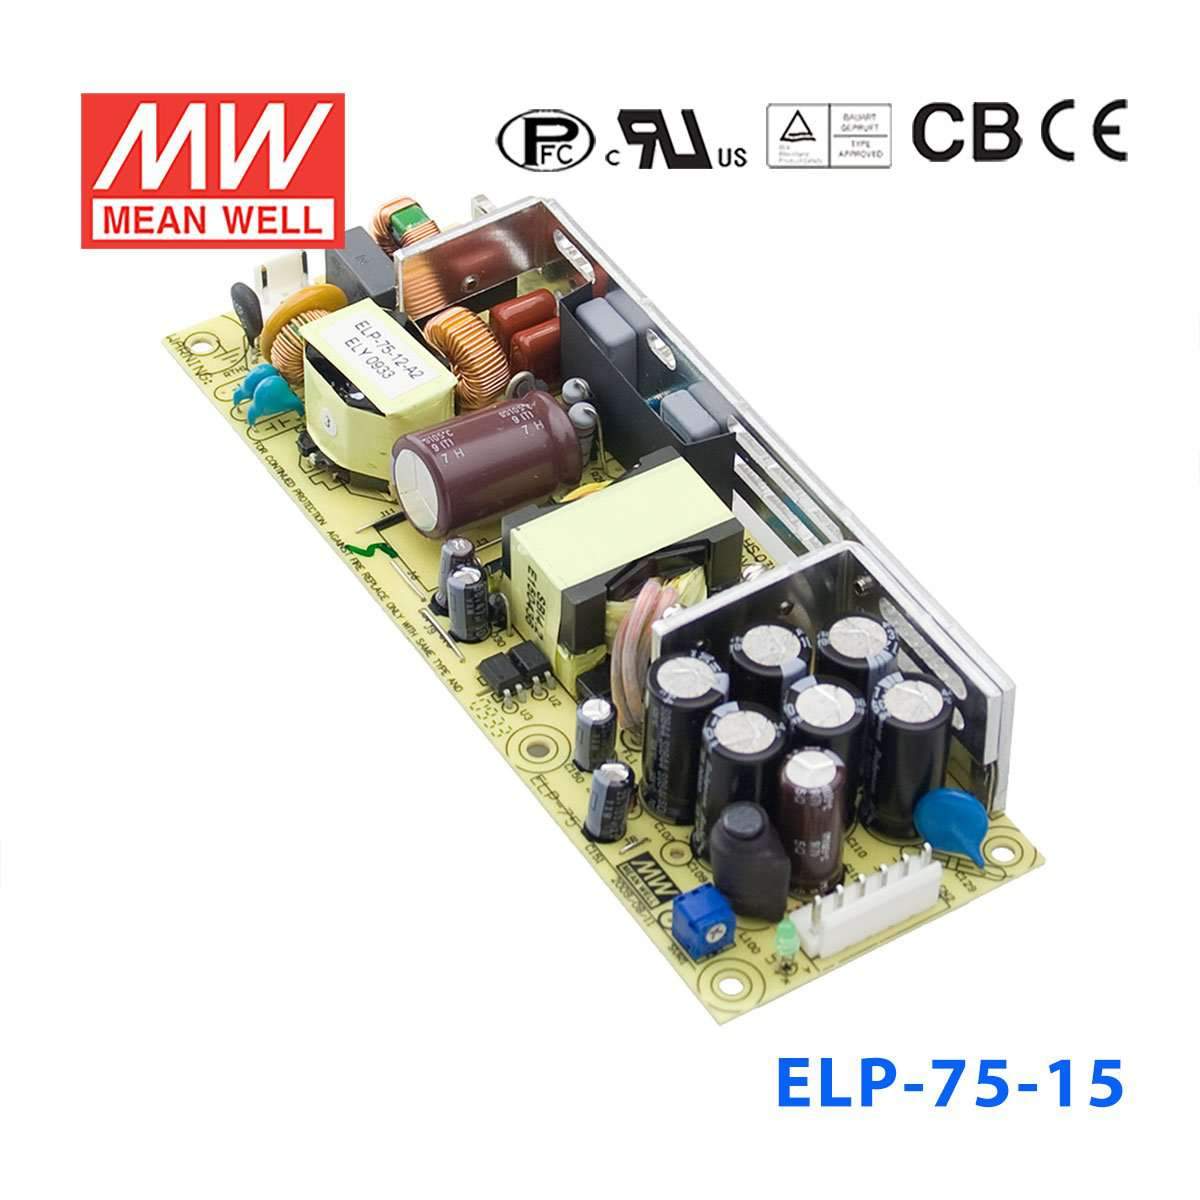 Mean Well ELP-75-15 Power Supply 75W 15V